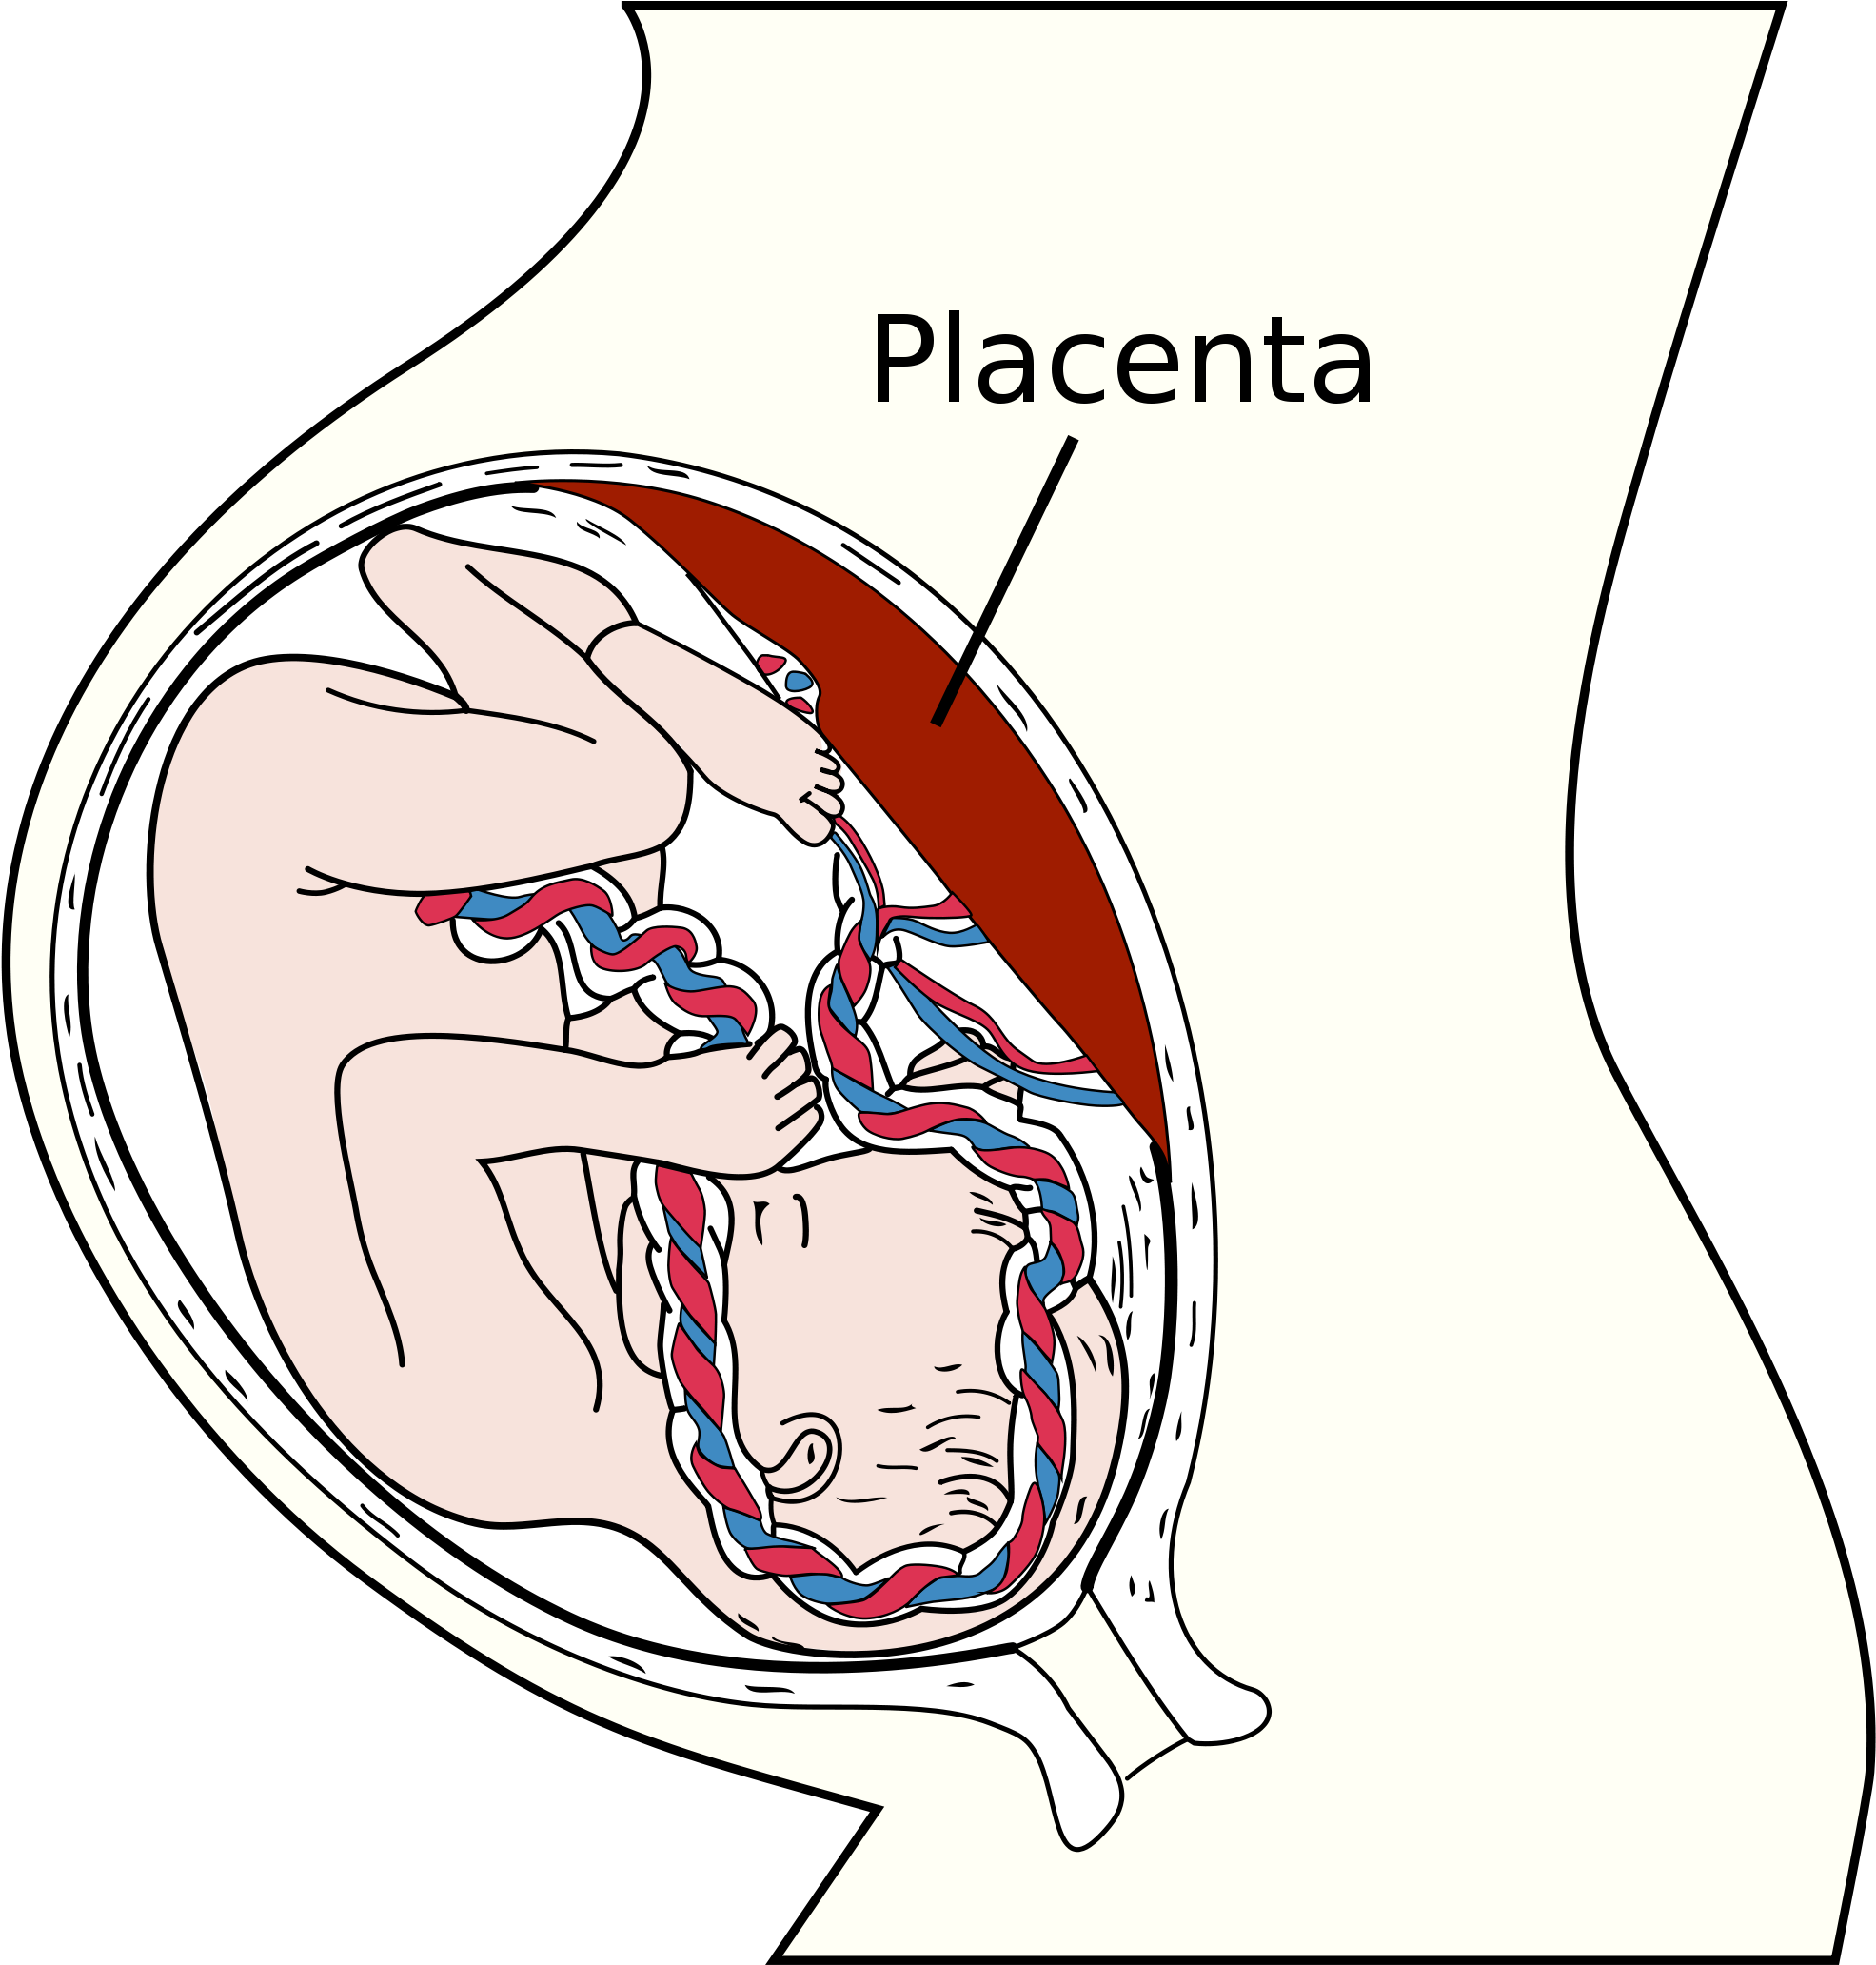 Prenatal Development Linked To Anxiety And Poor Mental - Placenta: Development, Function And Diseases (2000x2063)